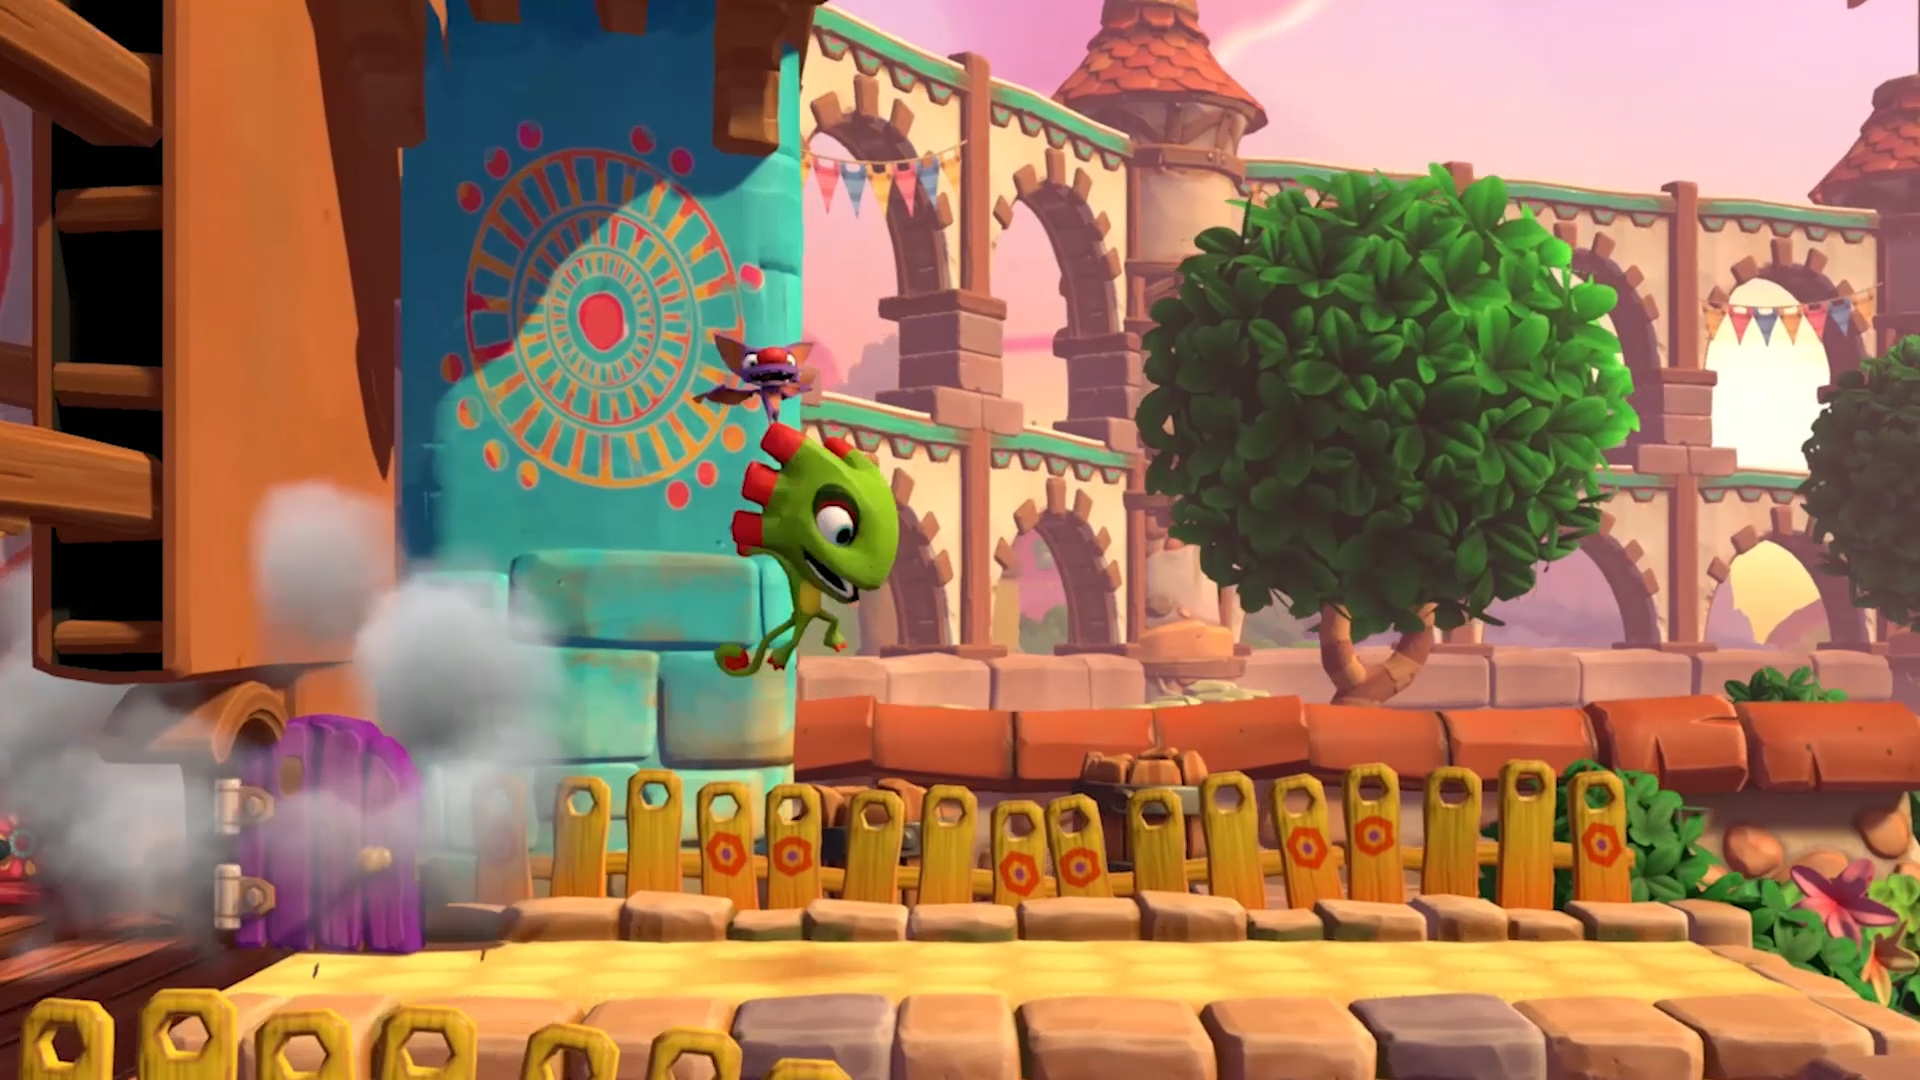 Metacritic - Yooka-Laylee reviews are in, and they're all over the map  PS4:  XONE:   PC:  metacritic.com/game/pc/yooka-laylee